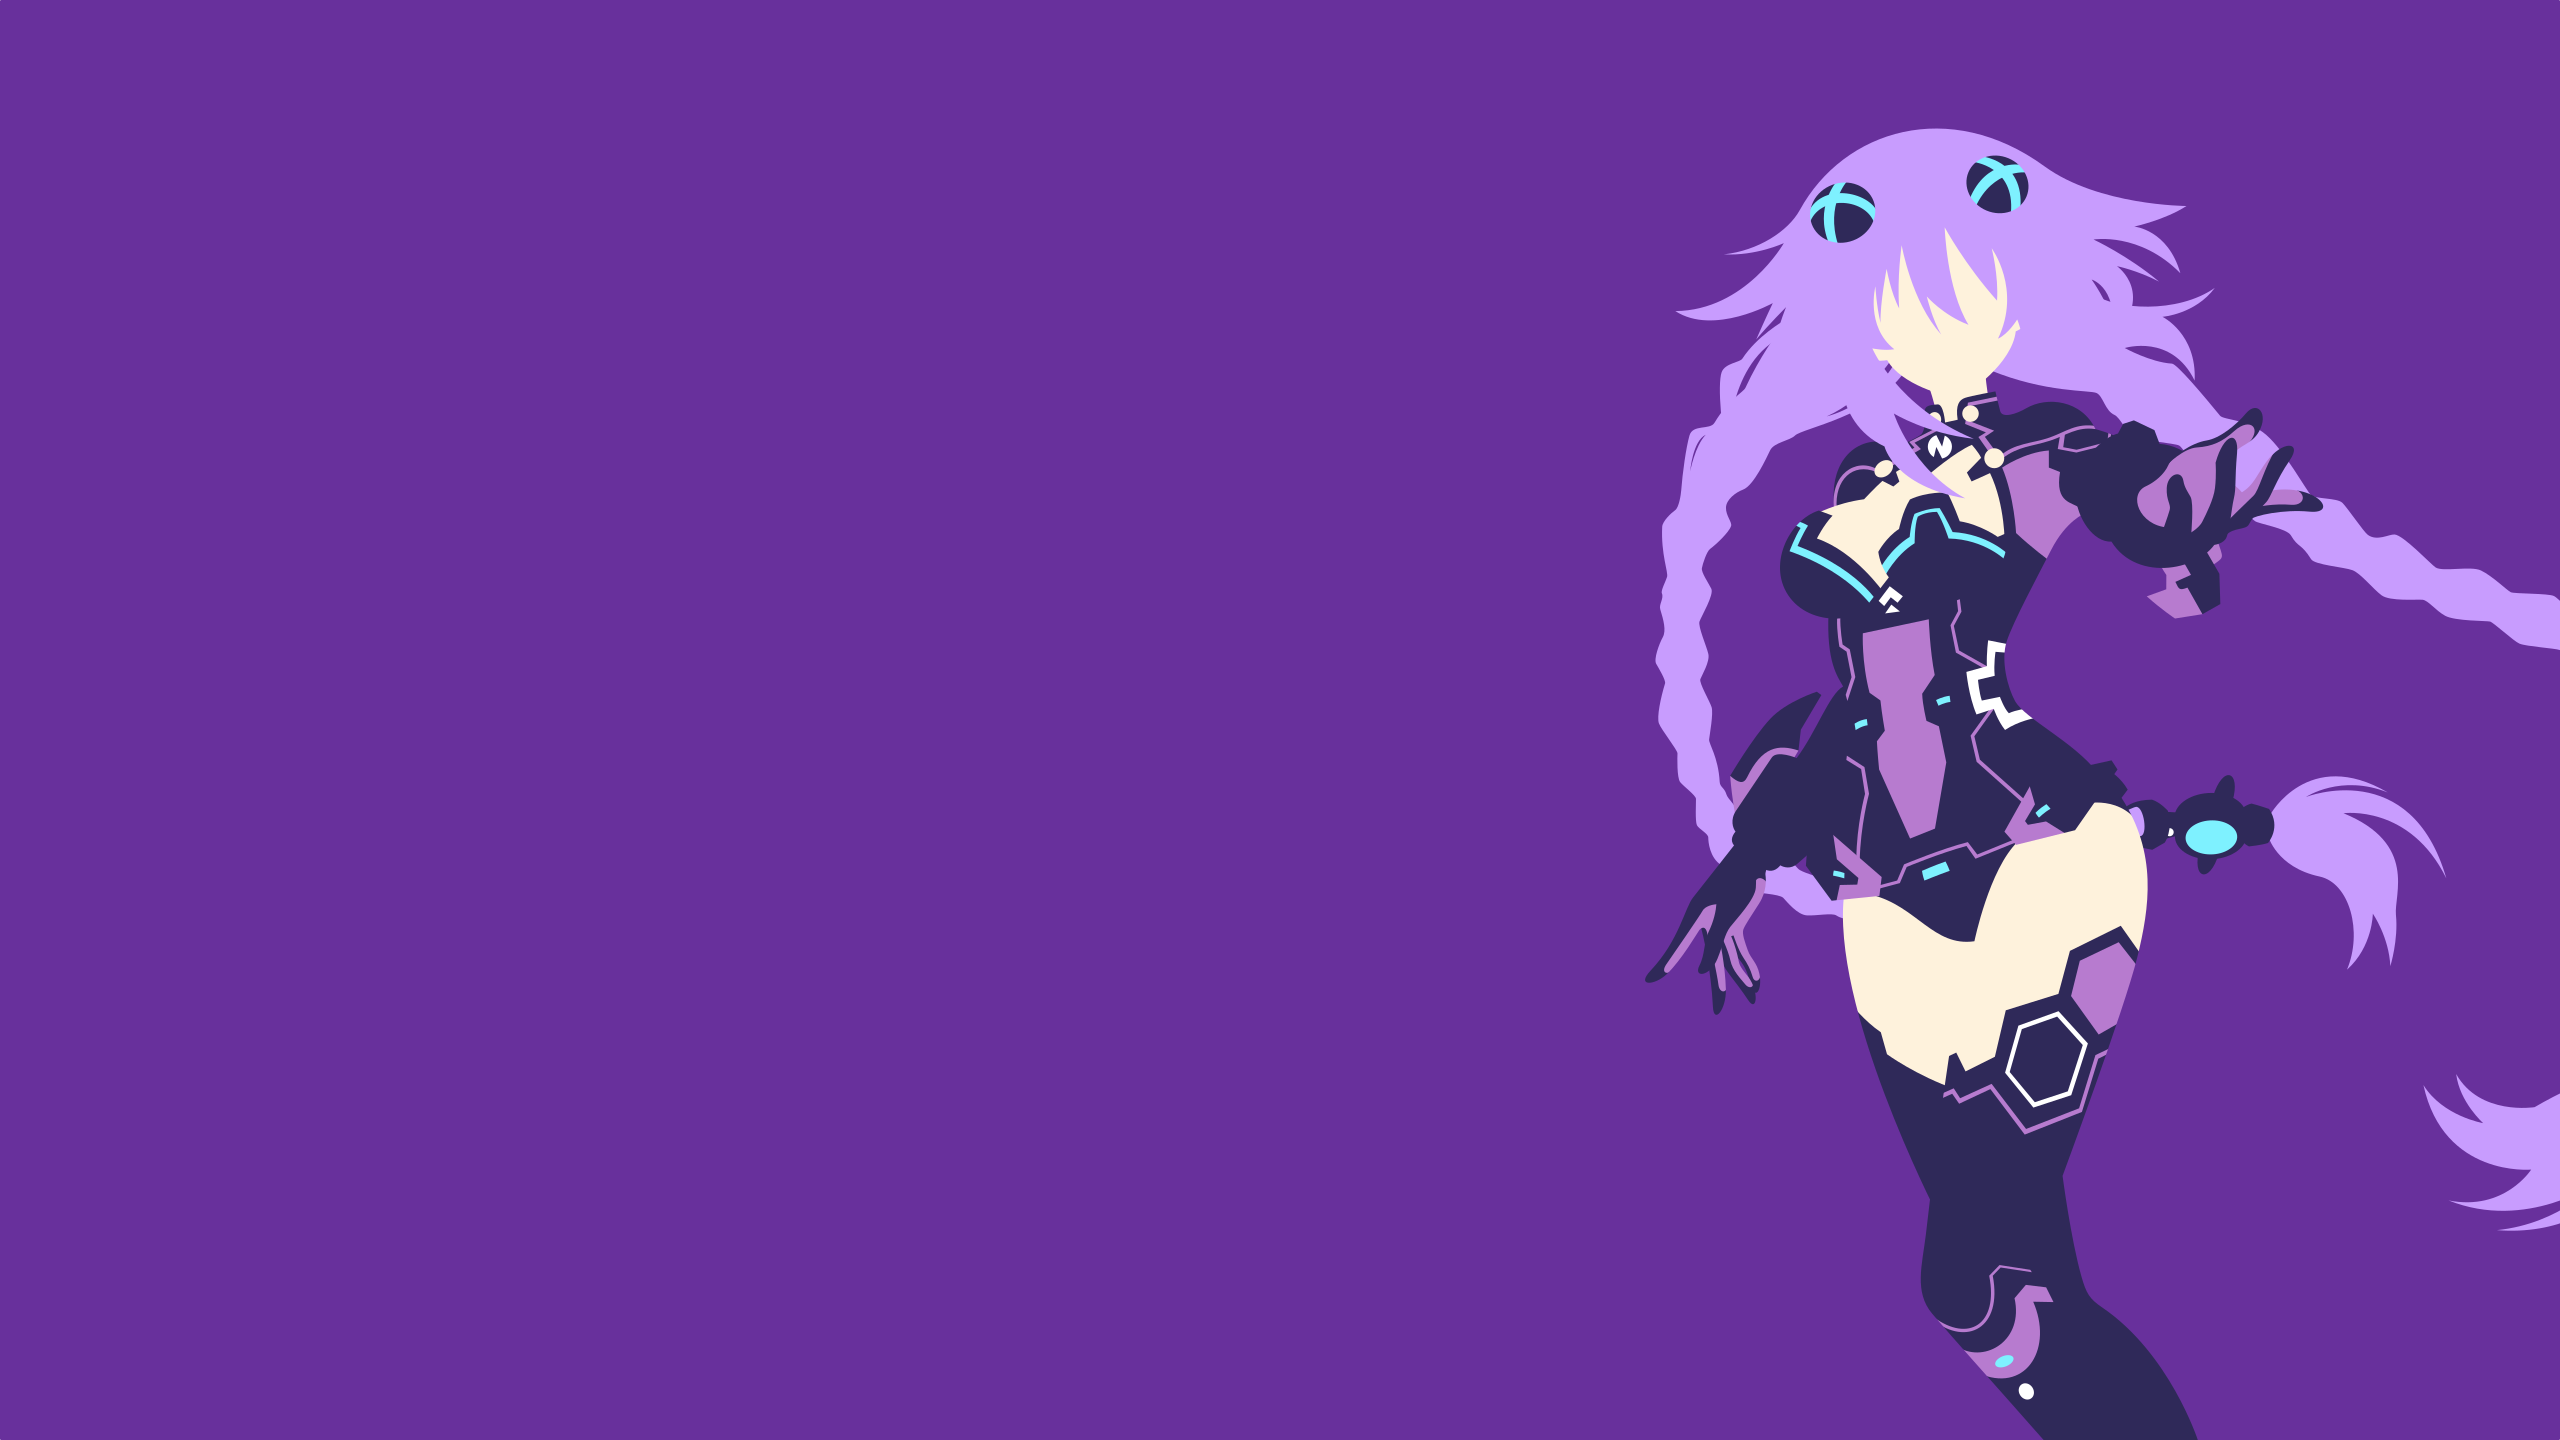 Purple Heart by Carionto